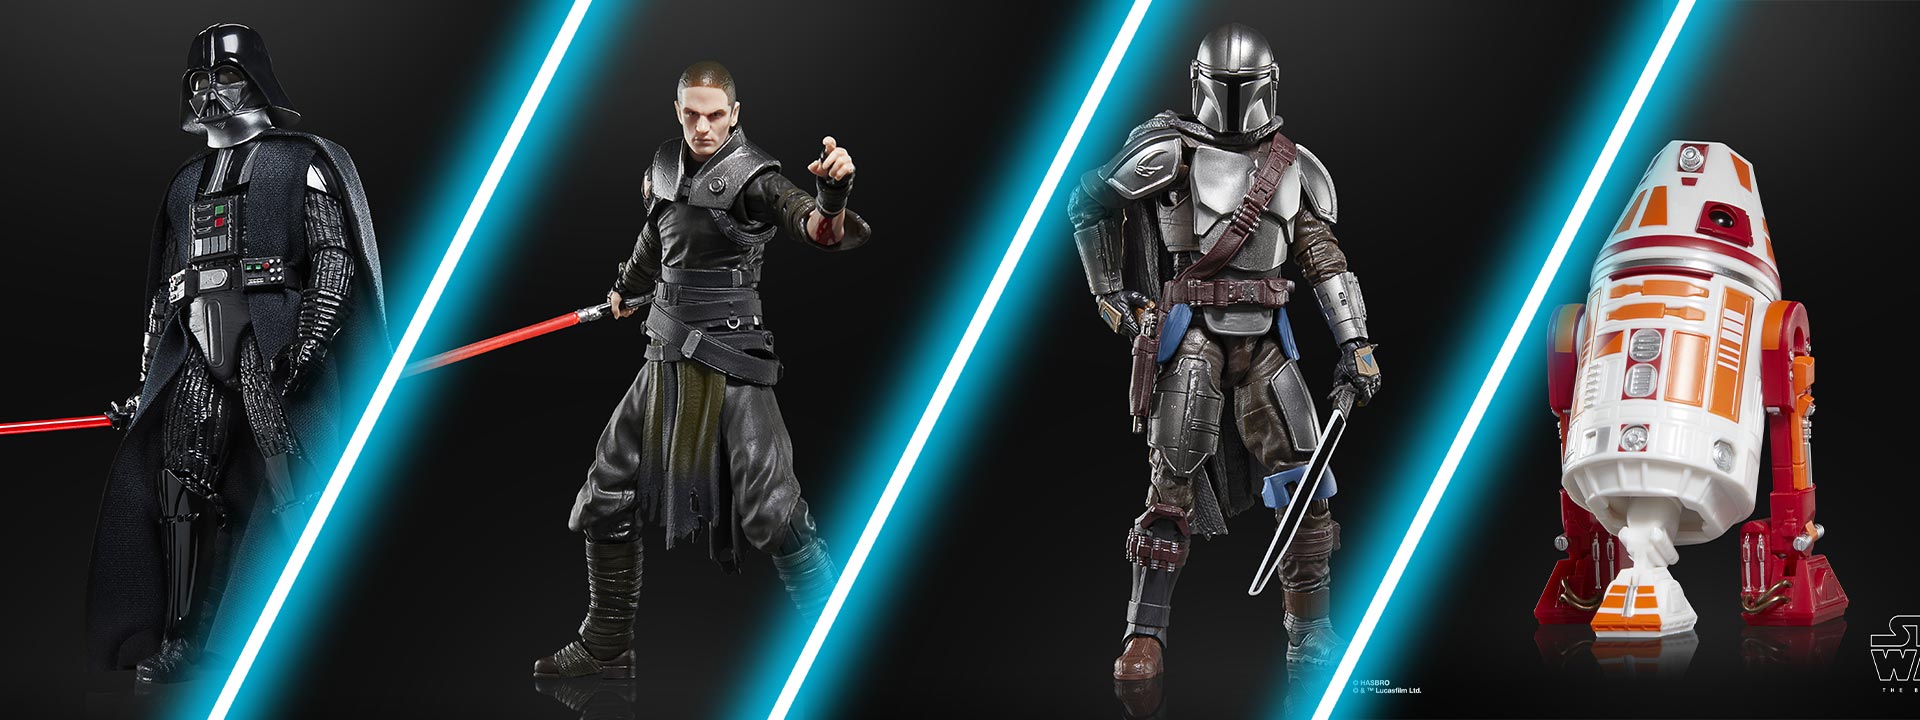 Black Series Star Wars: The Force Unleashed's Starkiller Figure From Hasbro  Available For Pre-Order